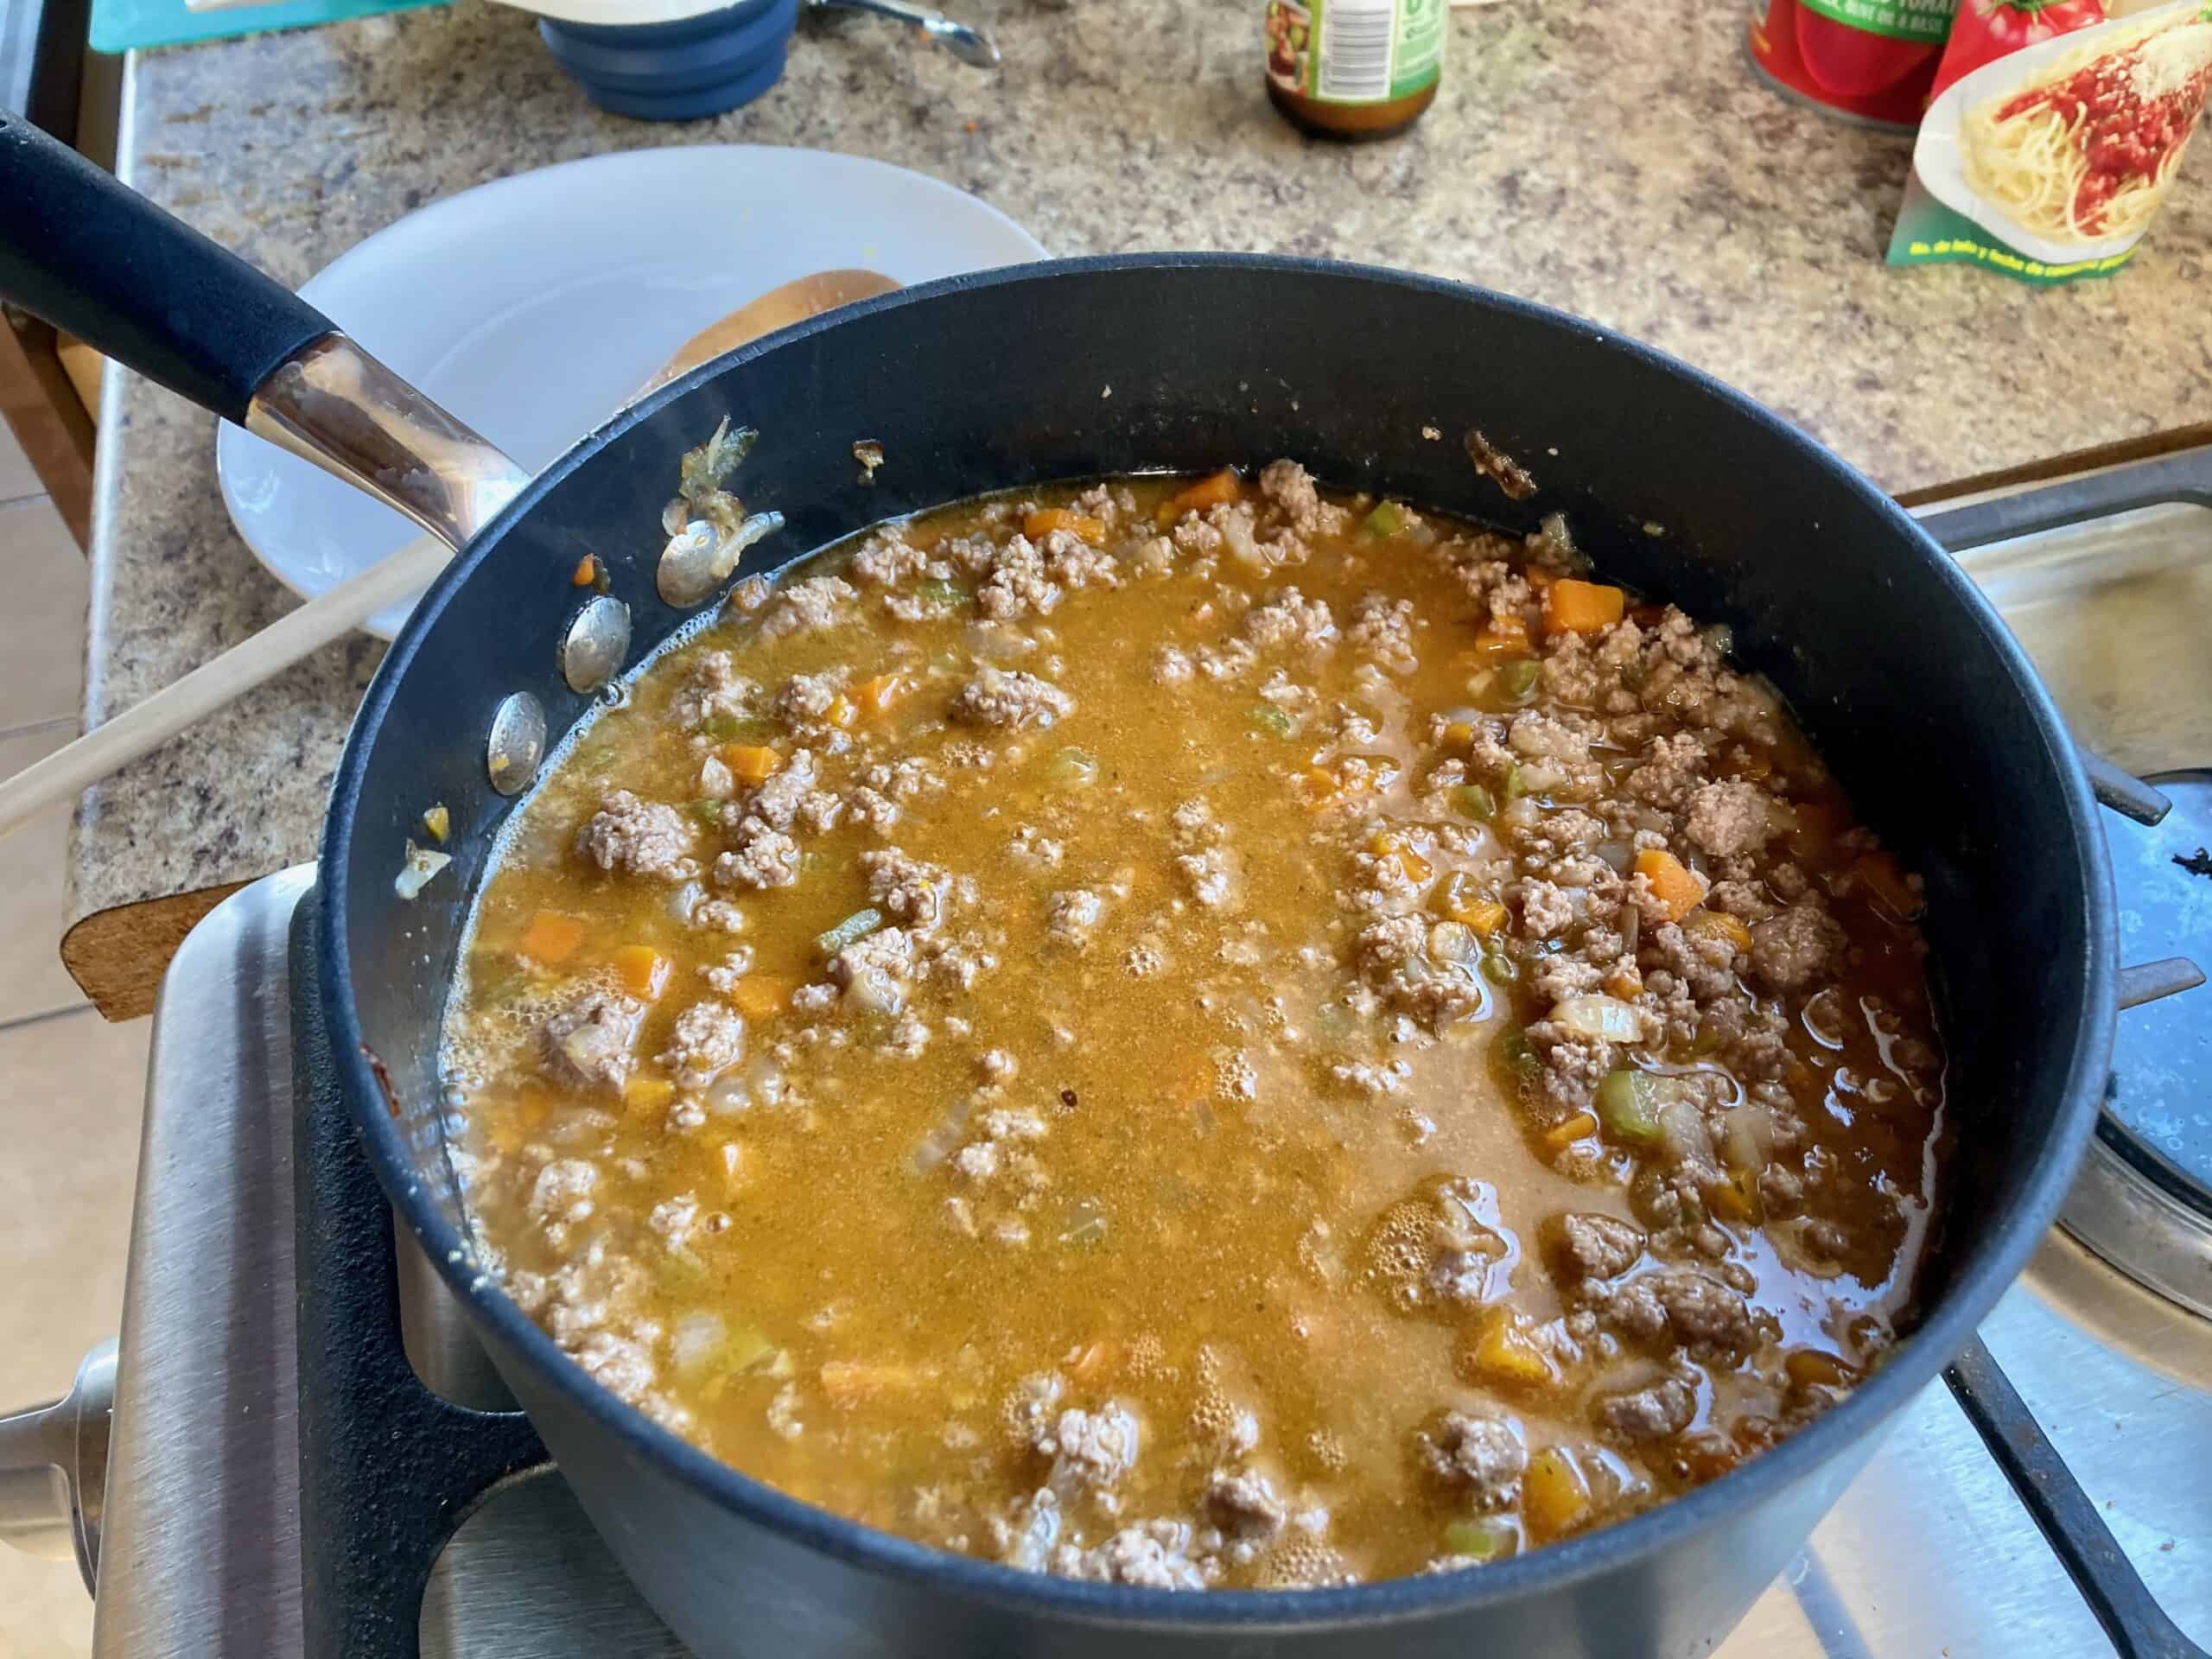 Turkey Bolognese sauce in a large pot on the stove.